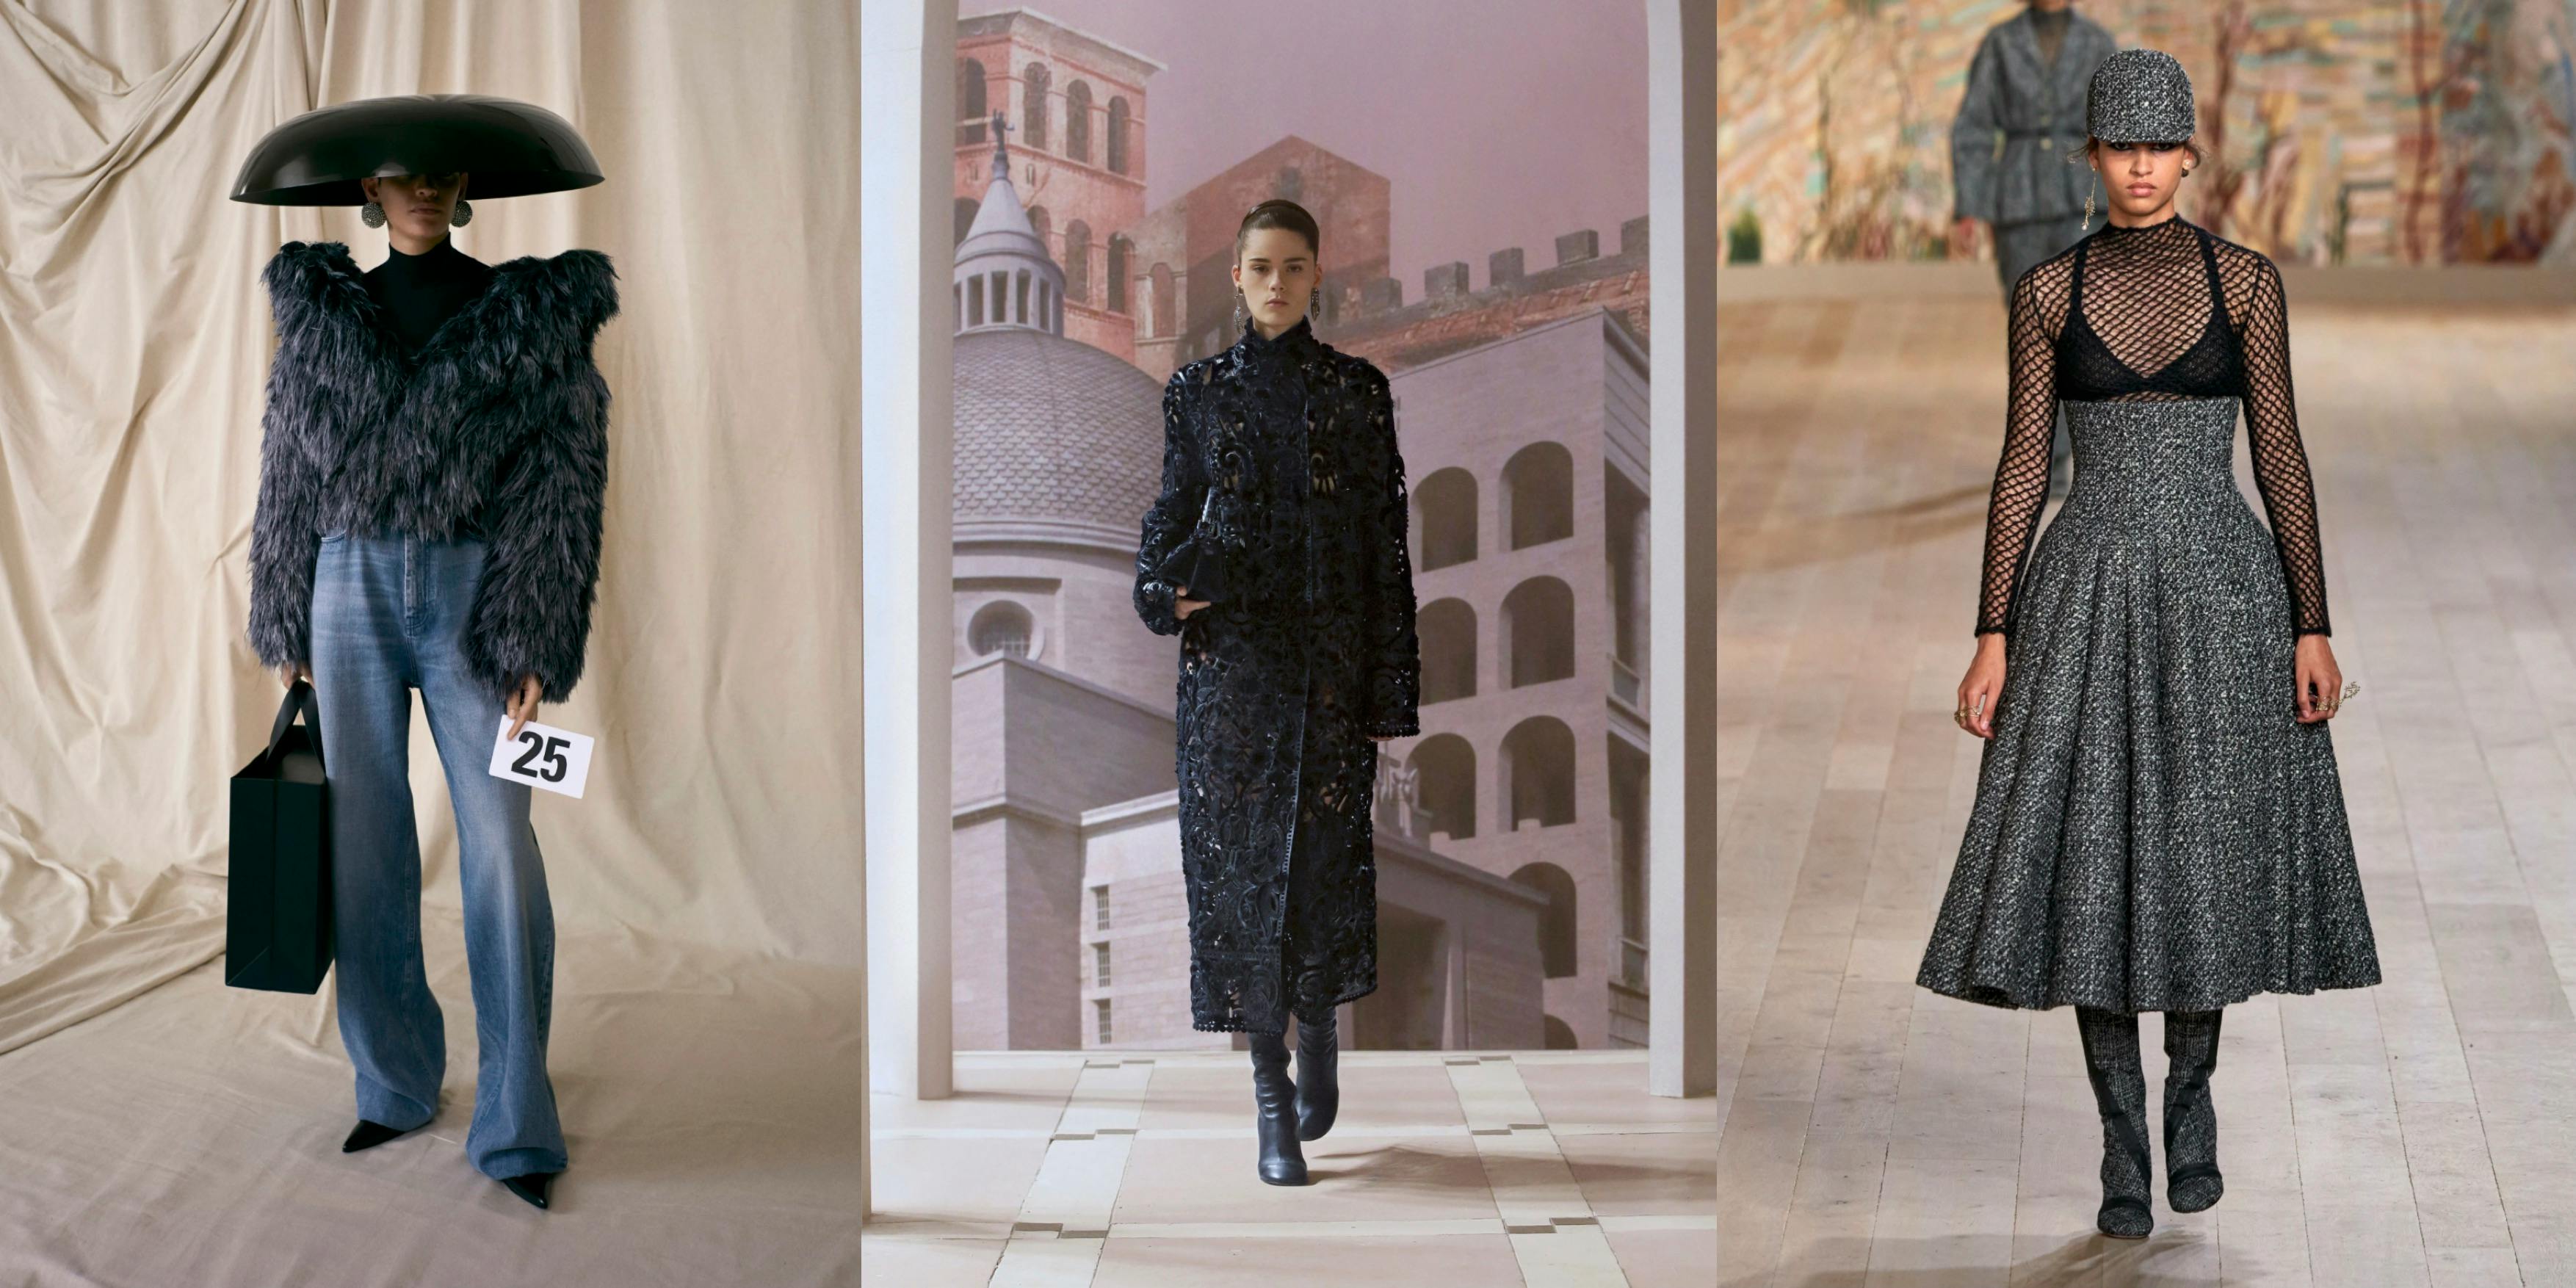 An Exclusive Look Behind The Scenes At Chanel's SS21 Couture Show